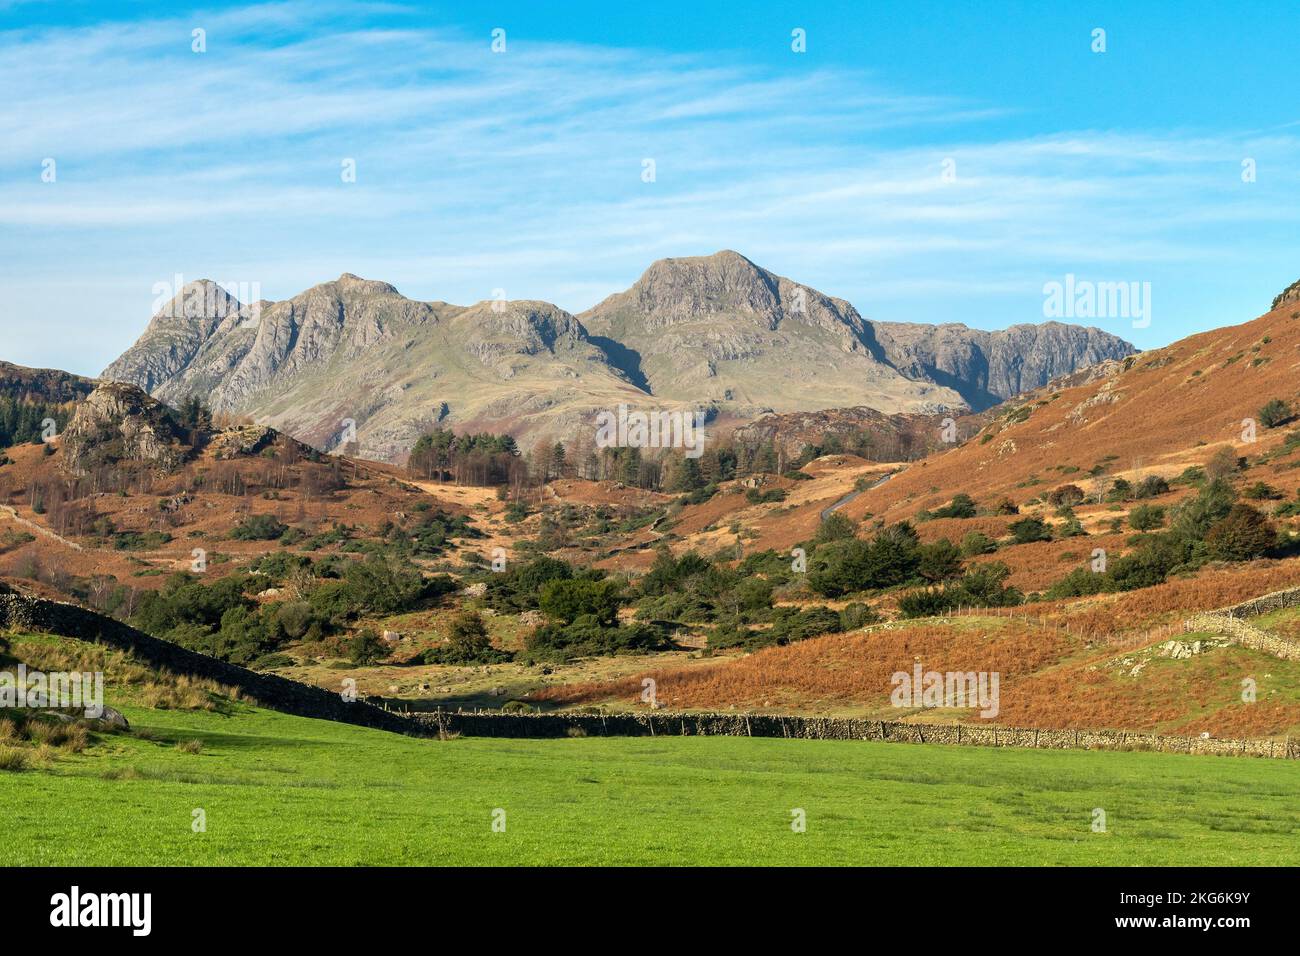 Langdale Pikes mountain range as seen from lush green farm fields in Little Langdale valley, English Lake District, Cumbria, England, UK Stock Photo